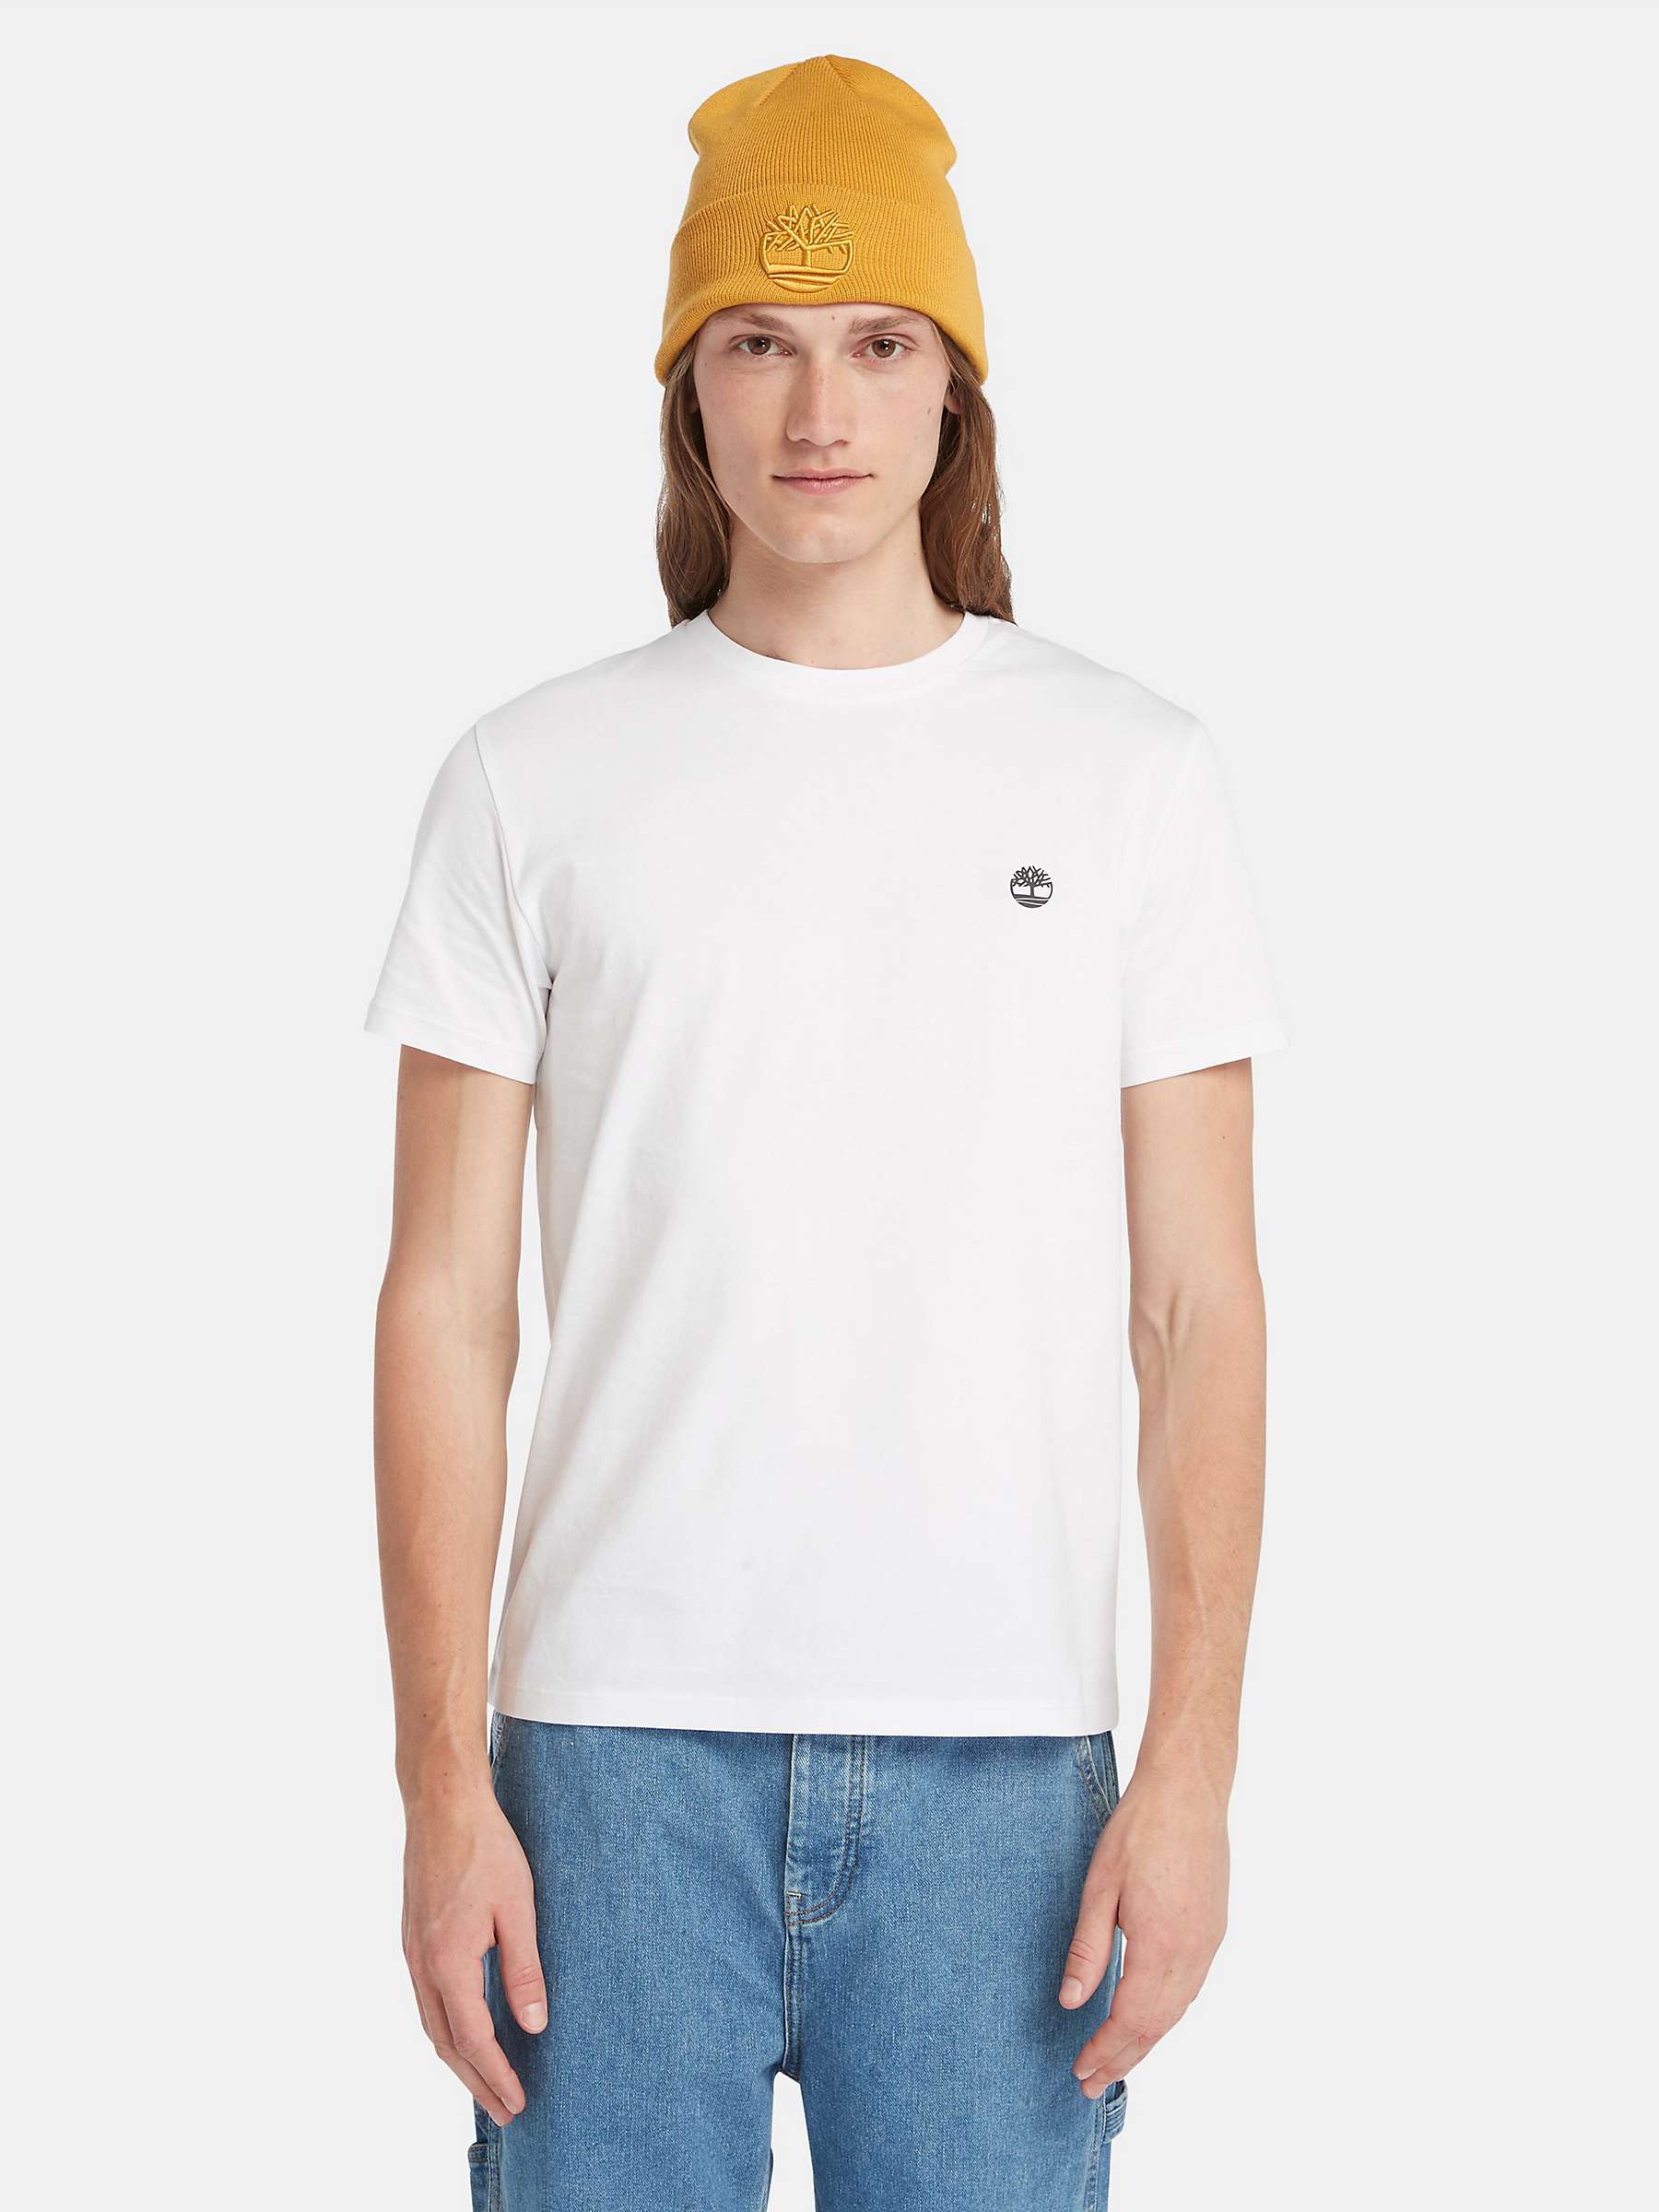 Buy Timberland Slim Fit Basic Jersey T-Shirt, Pack of 3, Multi Online at johnlewis.com